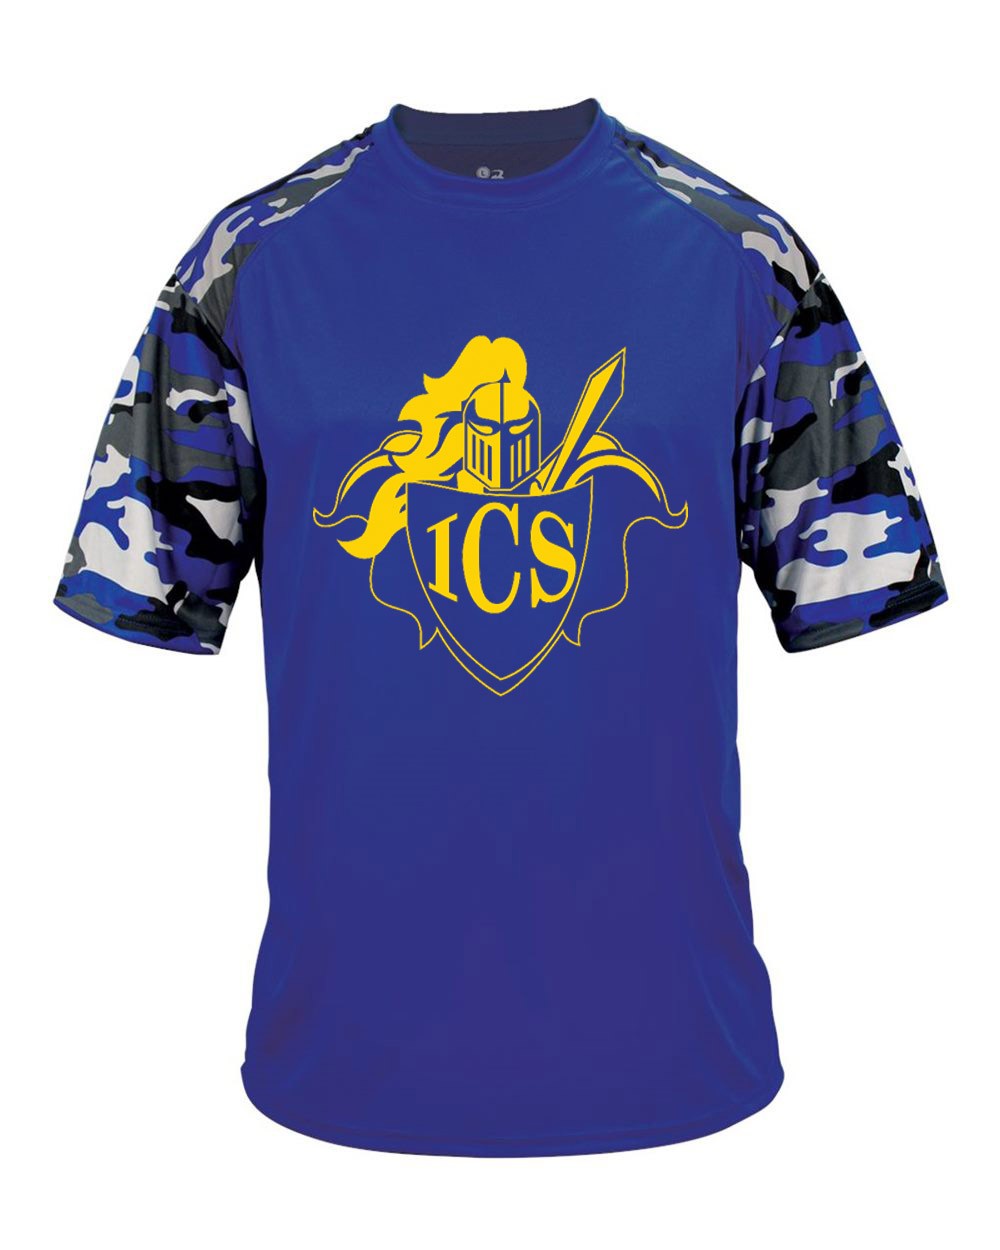 ICS Spirit S/S Camo T-Shirt w/ Gold Logo #12- Please Allow 3-4 Weeks for Delivery